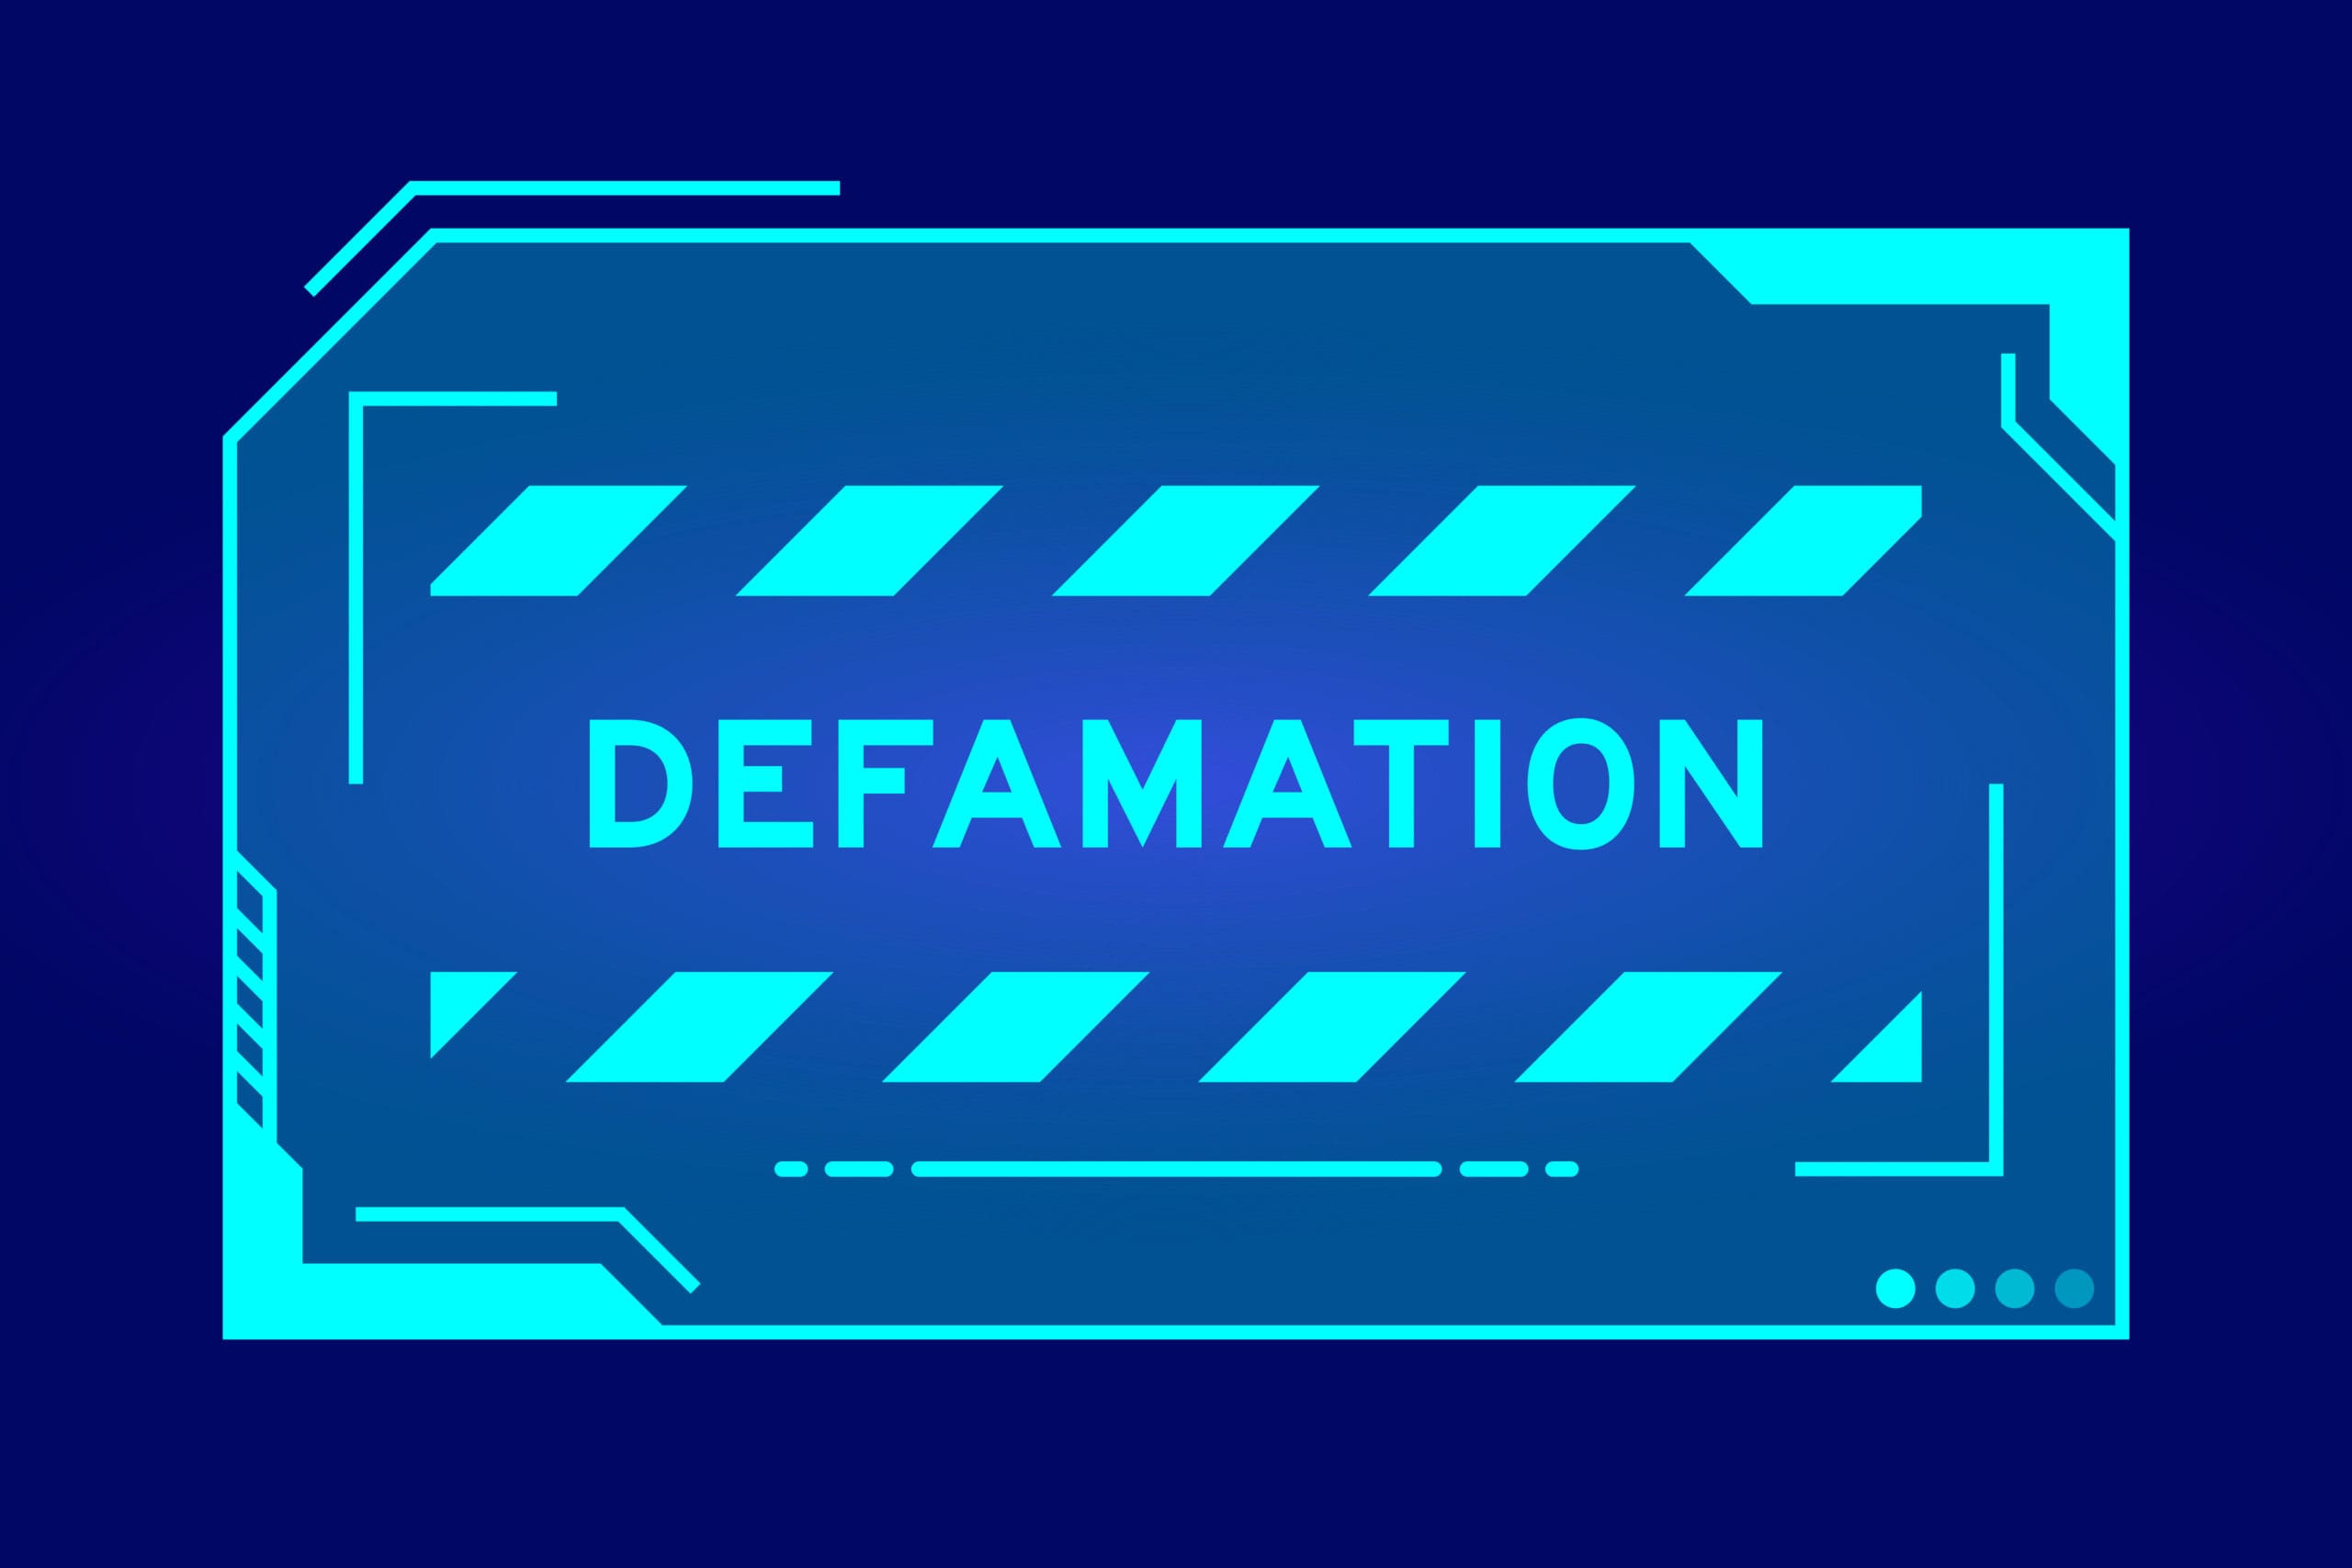 A defamation sign on a blue background.